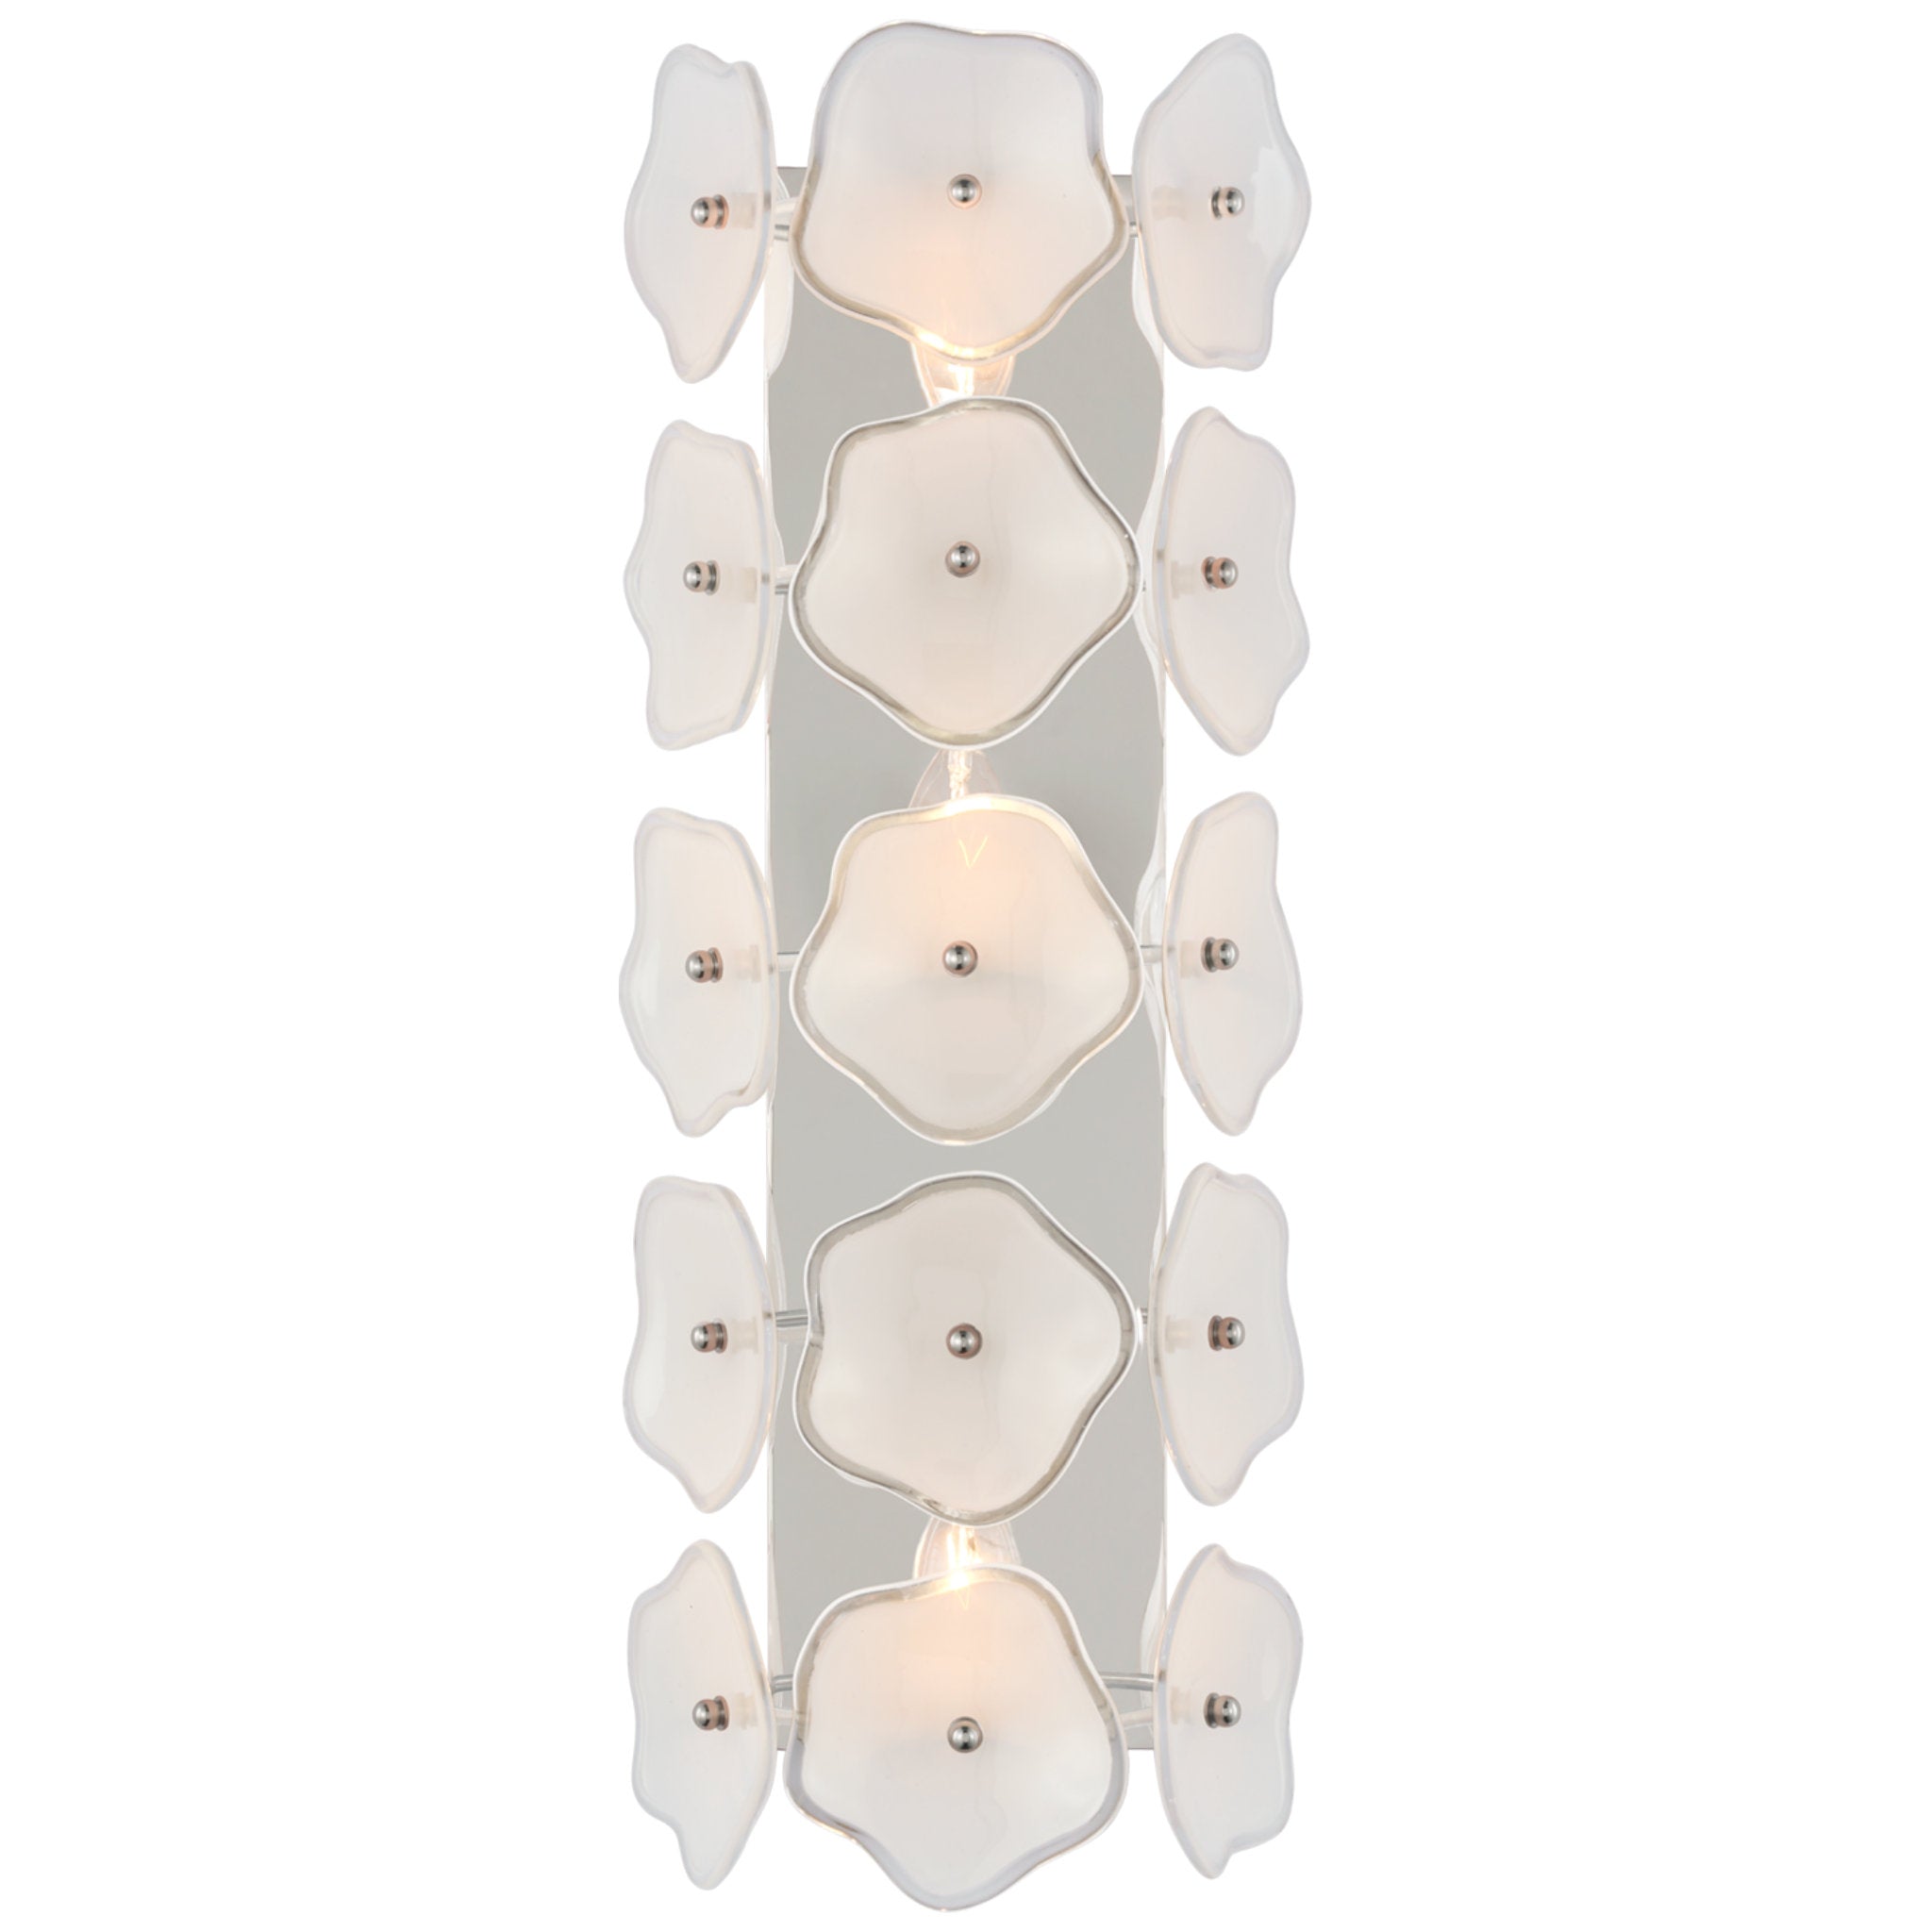 kate spade new york Leighton 20" Sconce in Polished Nickel with Cream Tinted Glass